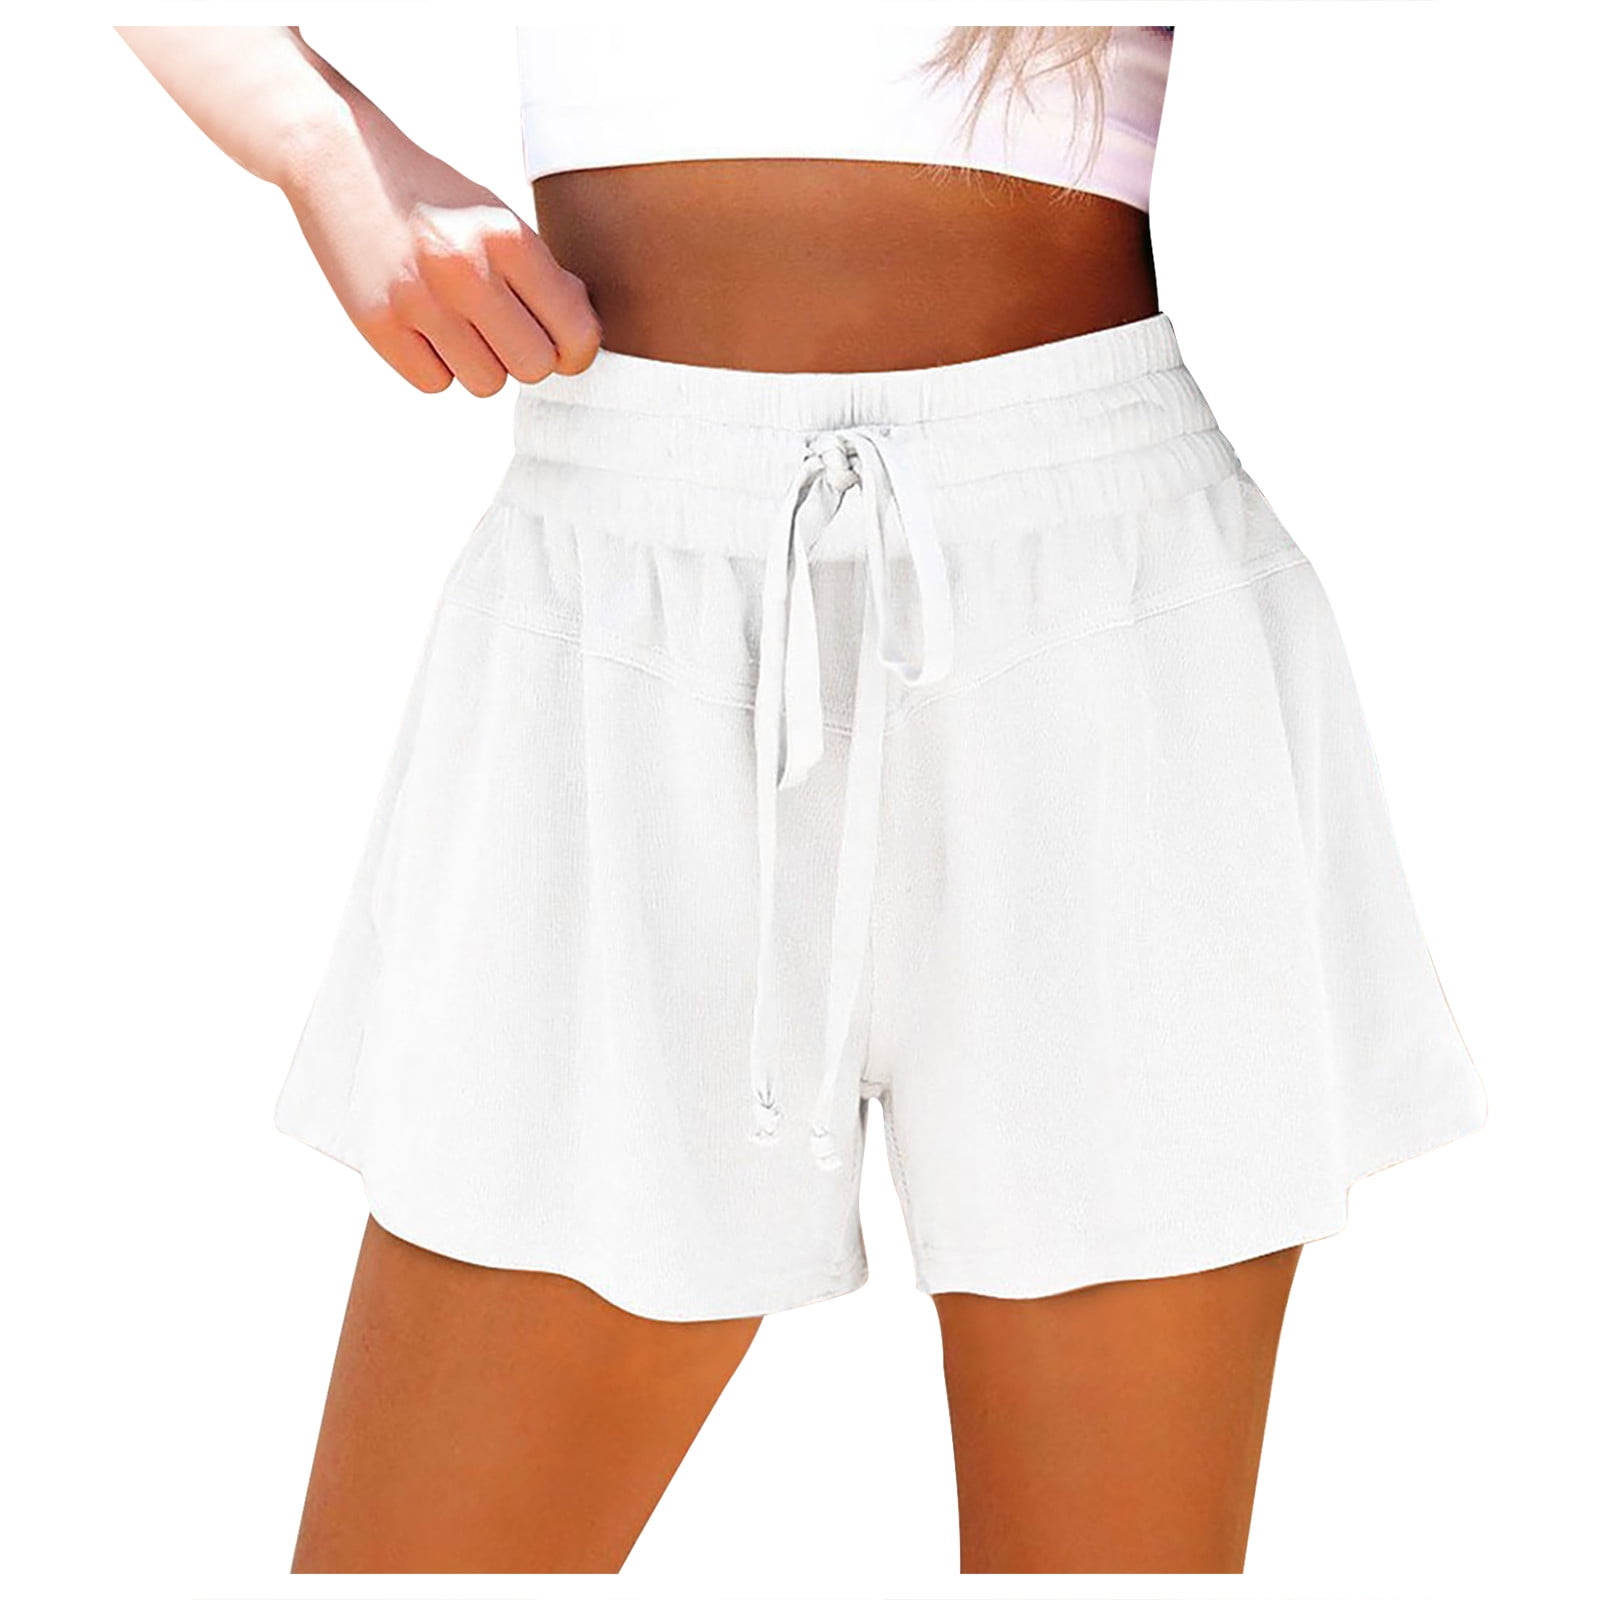 RQYYD Clearance Womens Shorts Casual Summer Drawstring Comfy Sweat